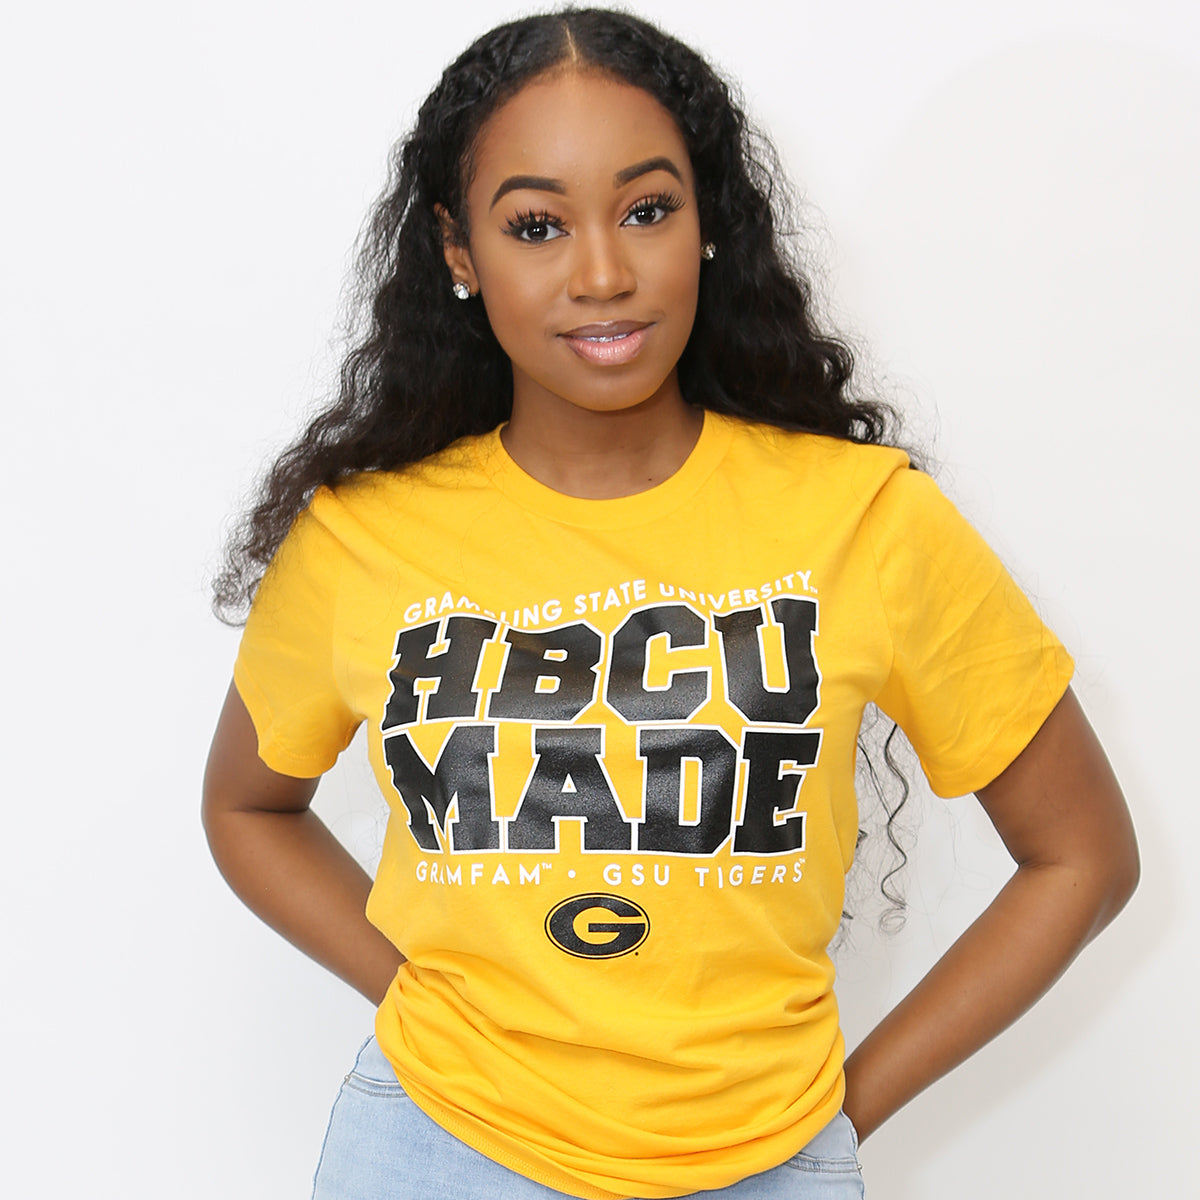 Grambling State | HBCU MADE Gold Unisex Tees (Z)